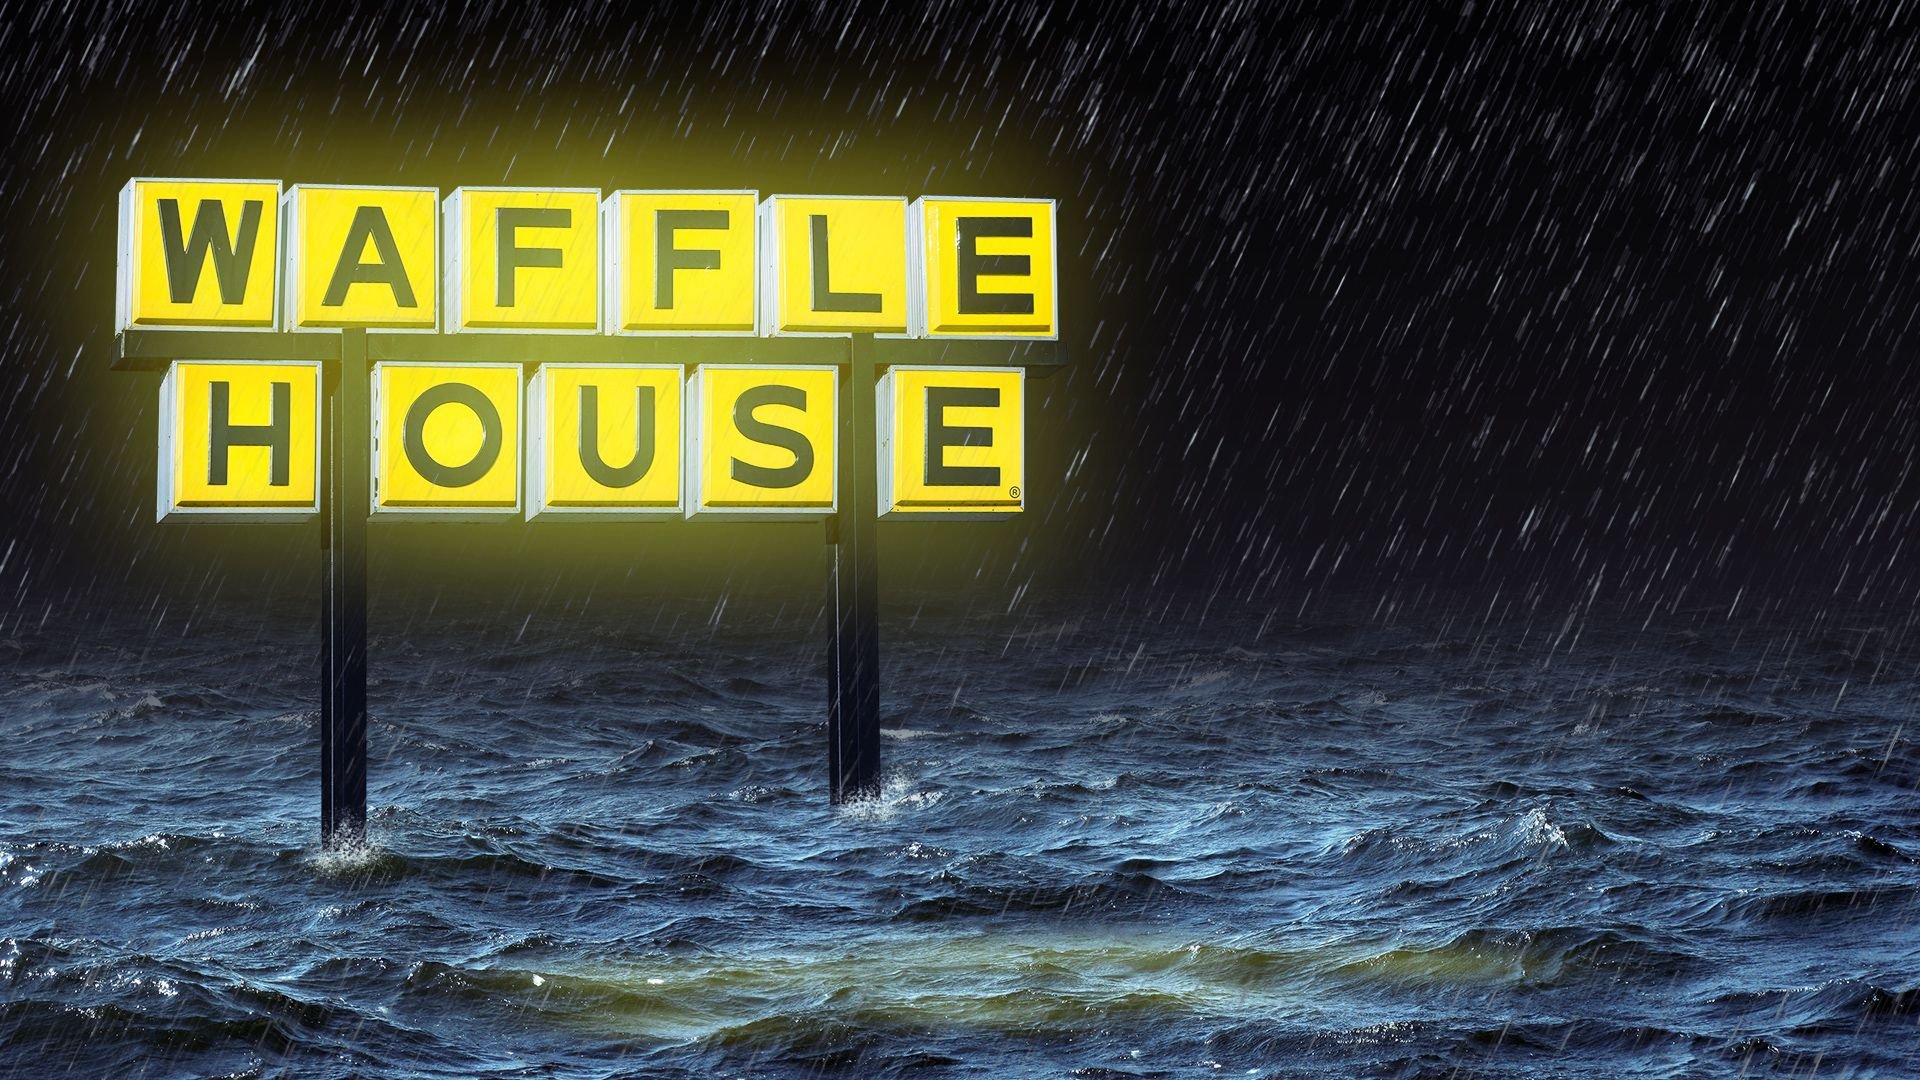 How the Waffle House Index became one way to judge hurricane risk